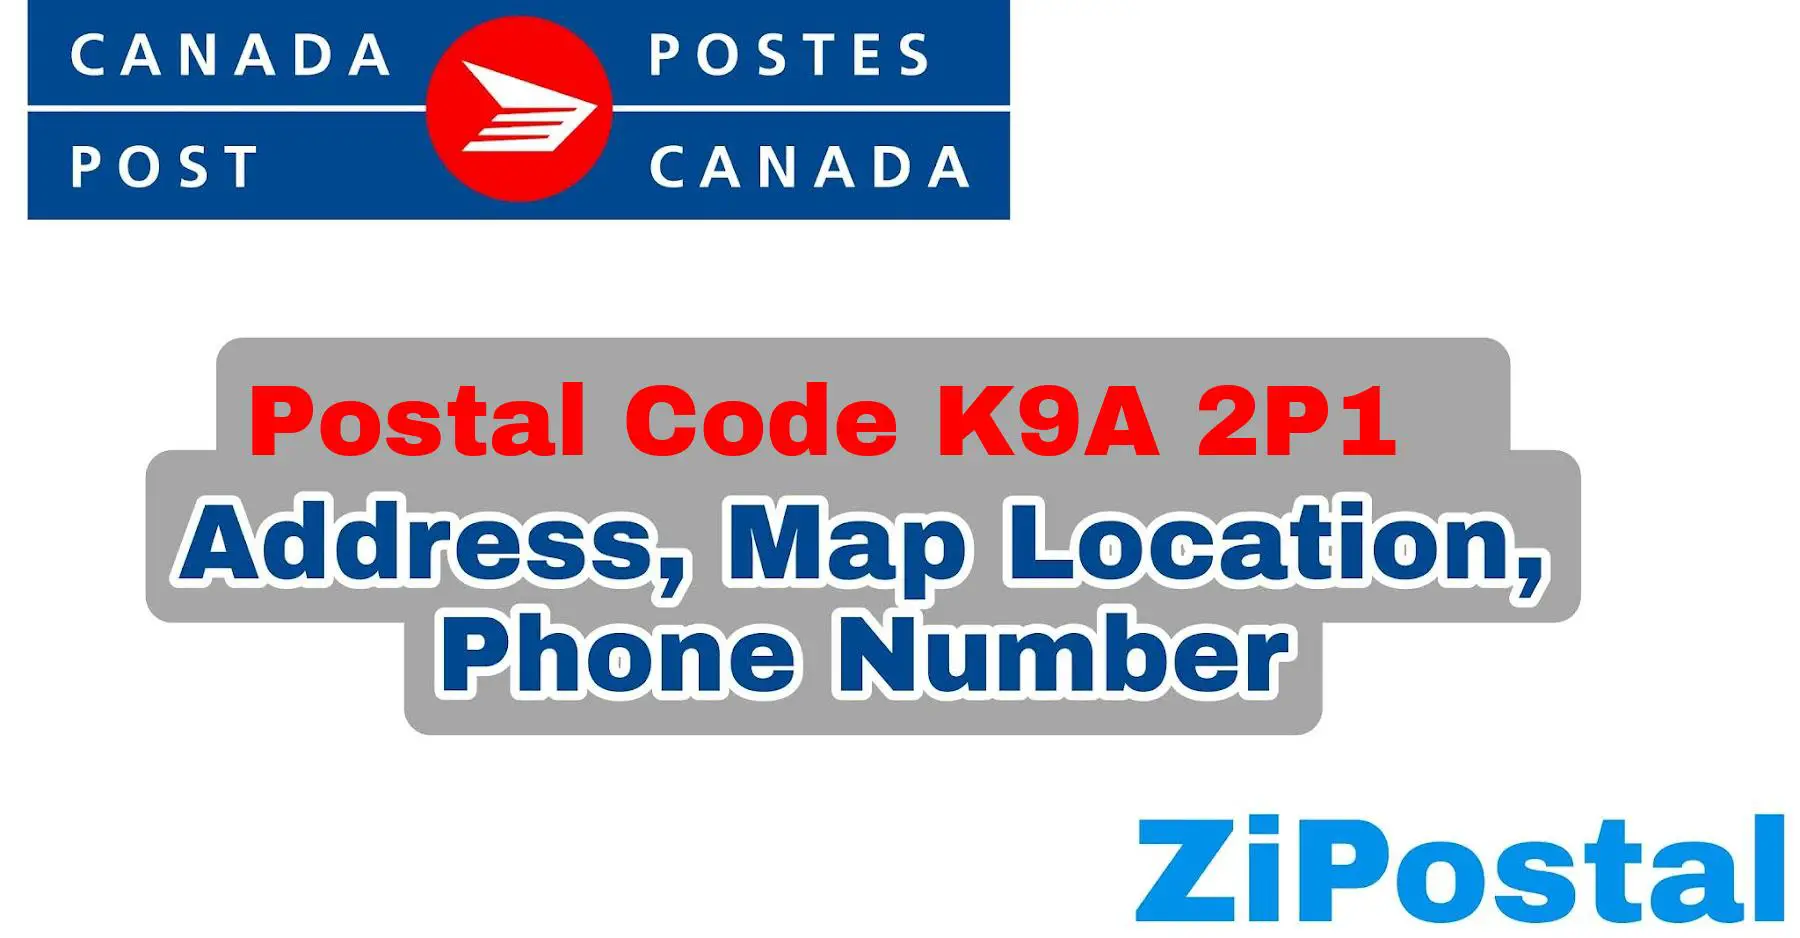 Postal Code K9A 2P1 Address Map Location and Phone Number